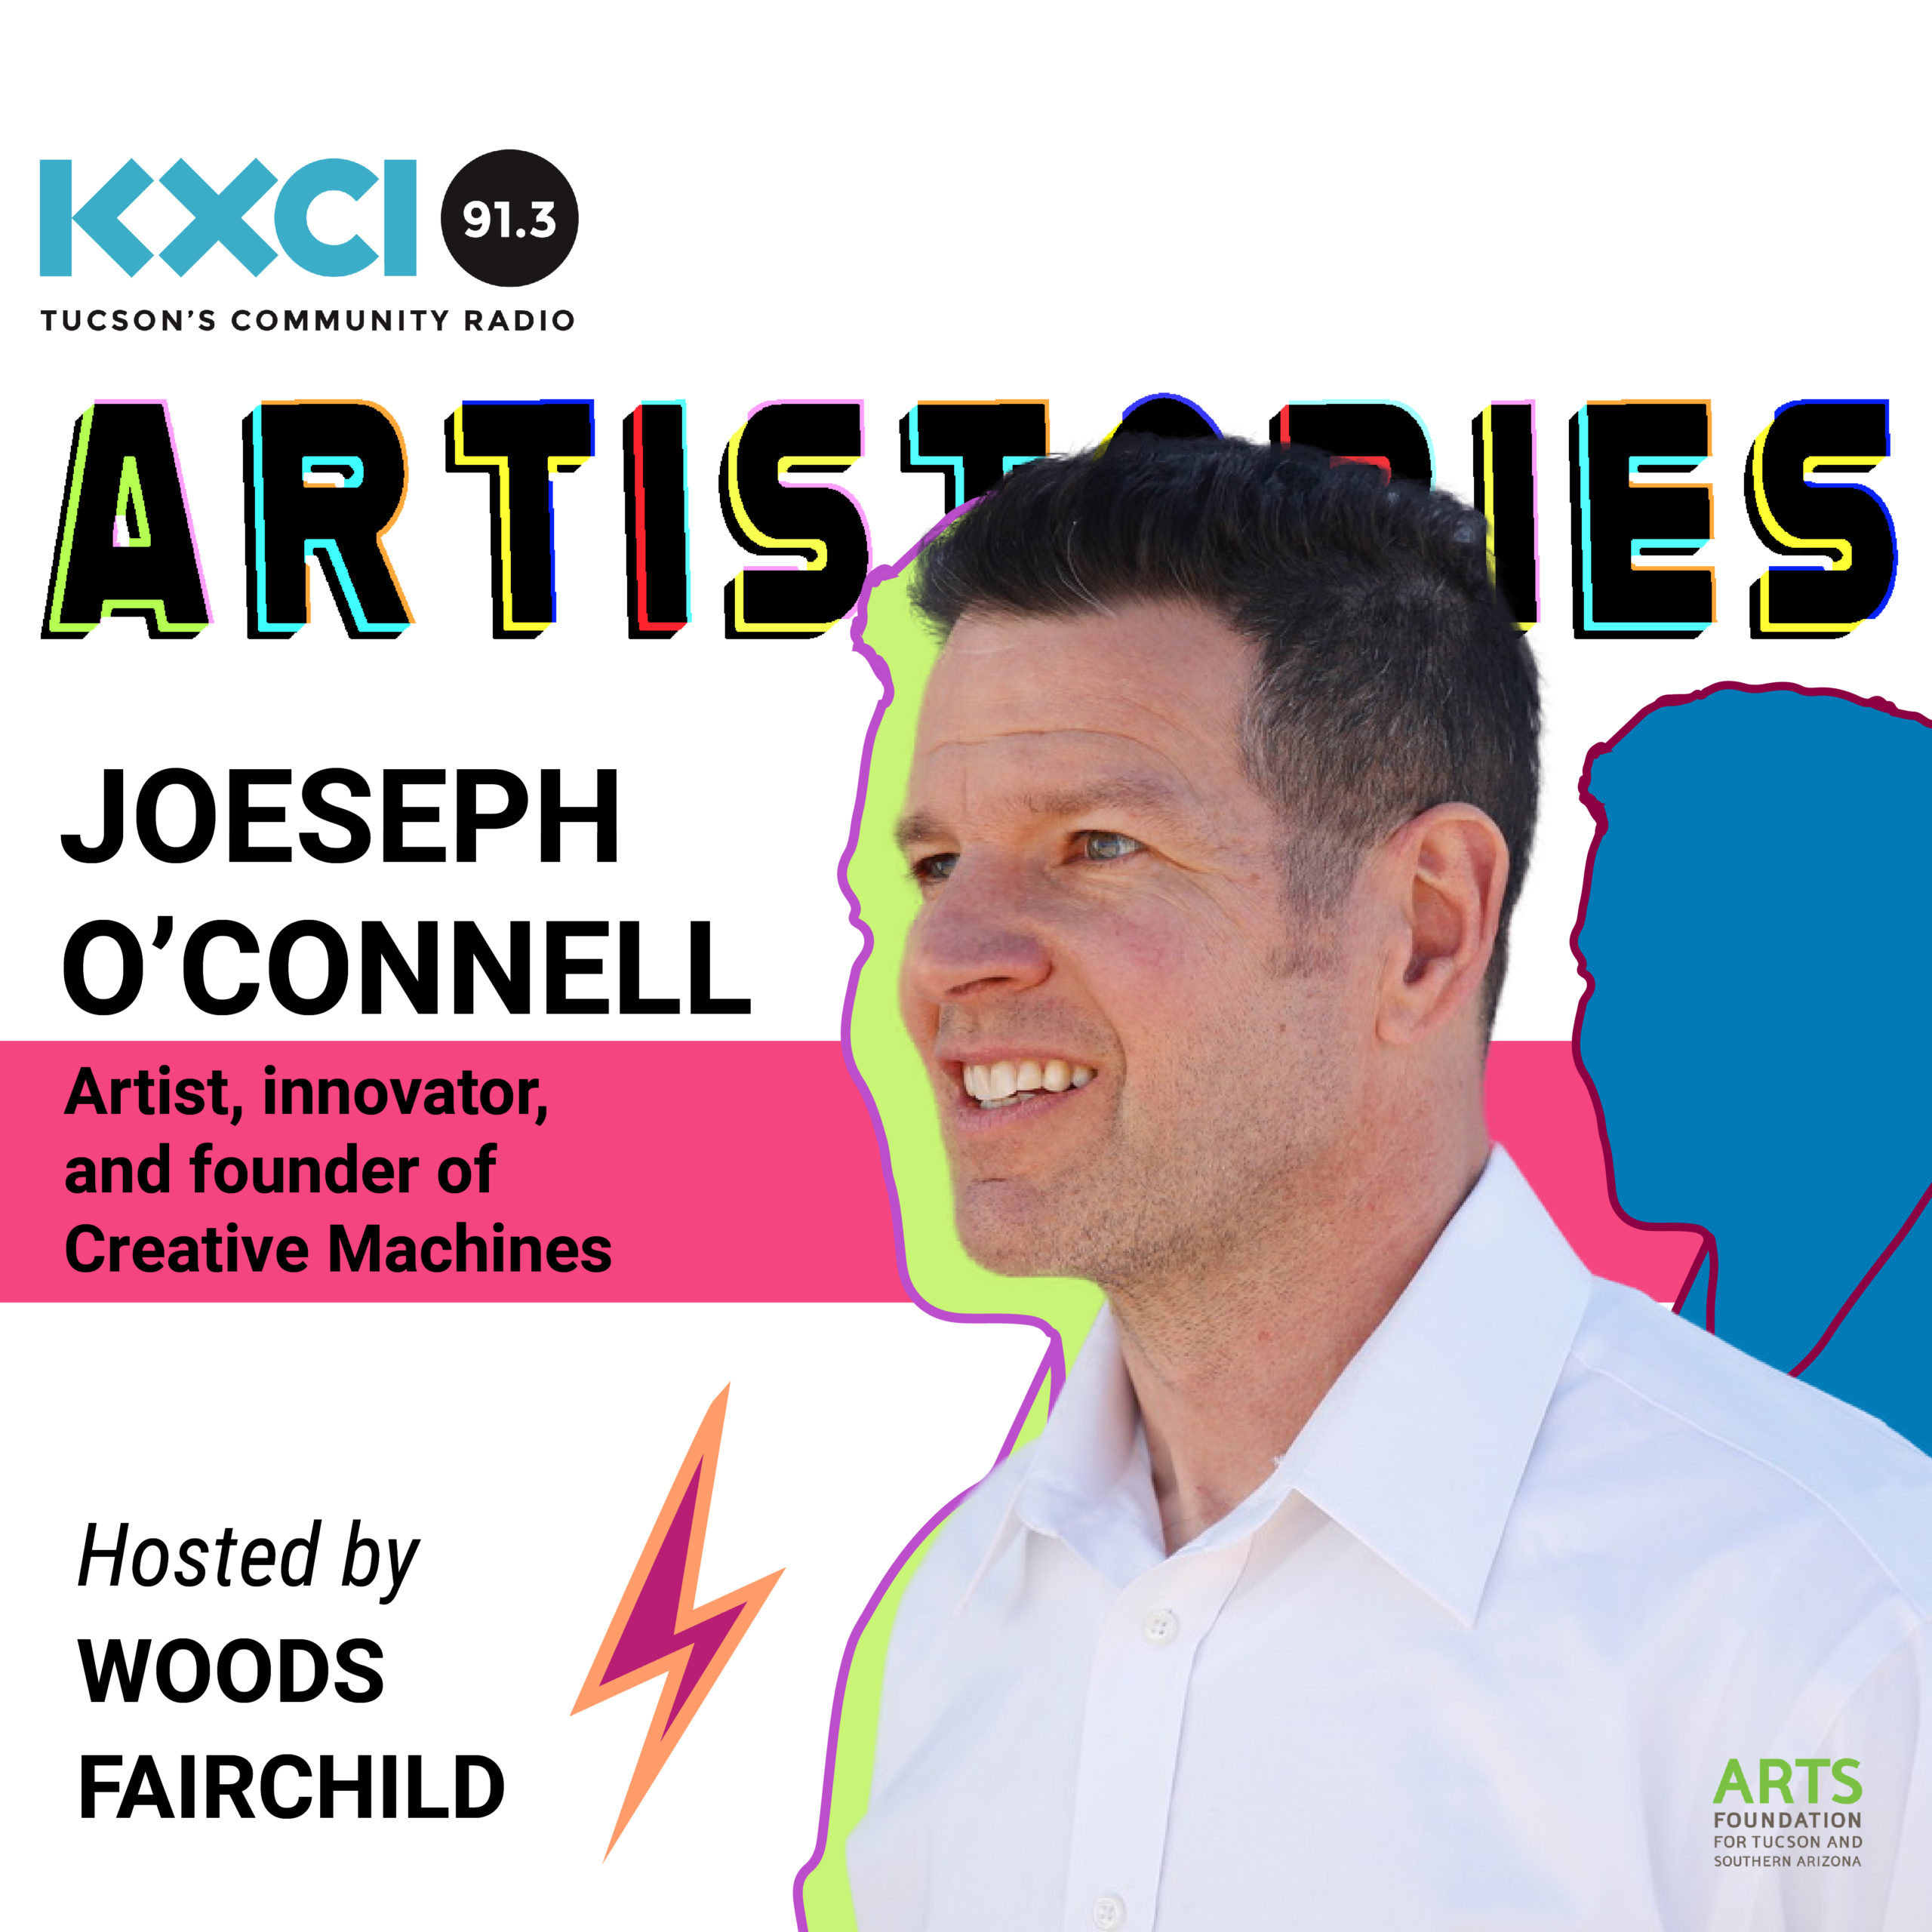 Joseph O'Connell - Artist, Innovator, Founder and Owner of Creative Machines